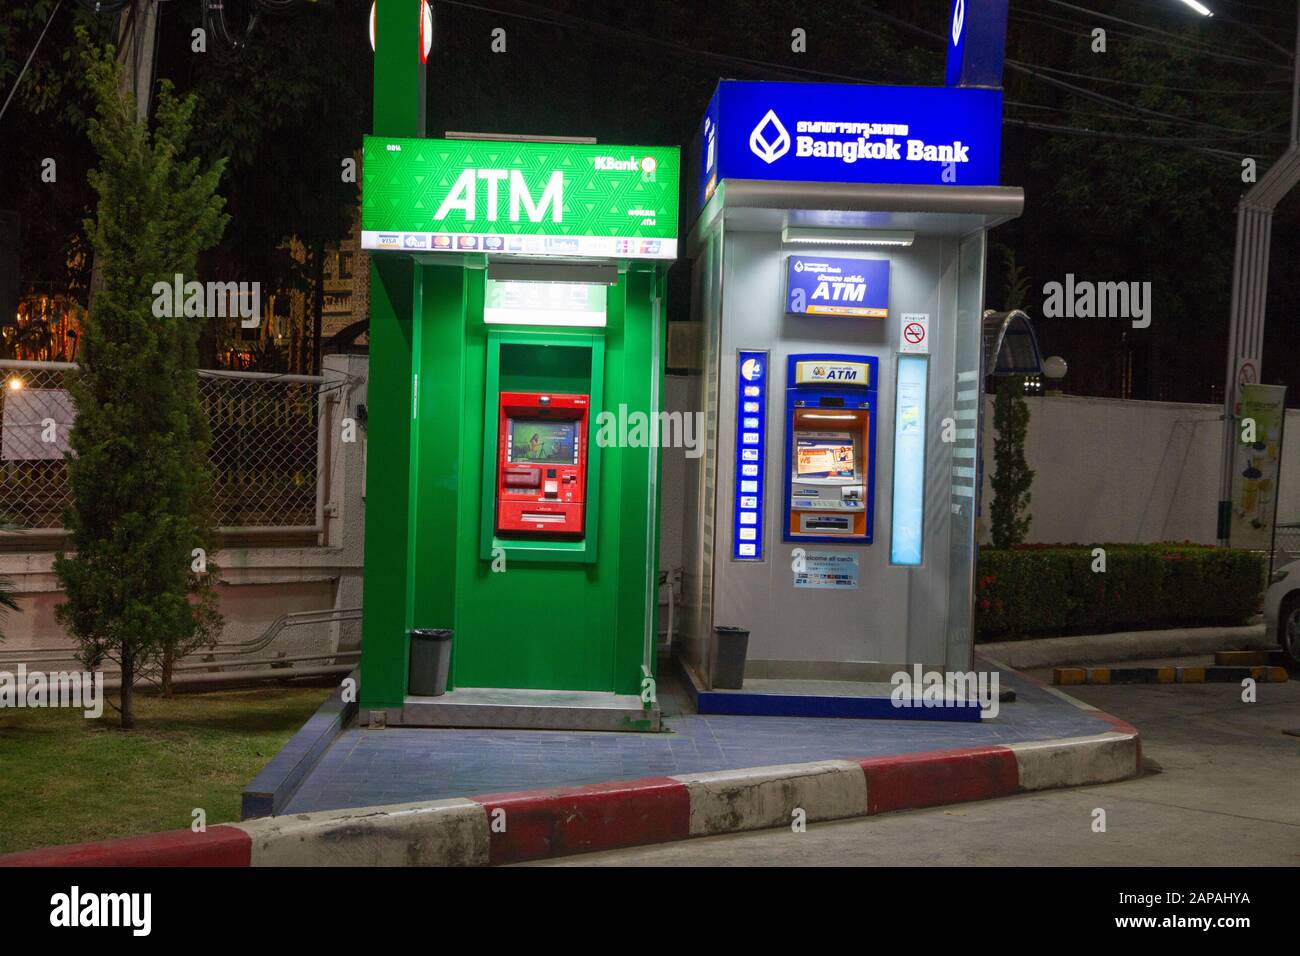 ATM machine in street, Chiang Mai Thailand Stock Photo